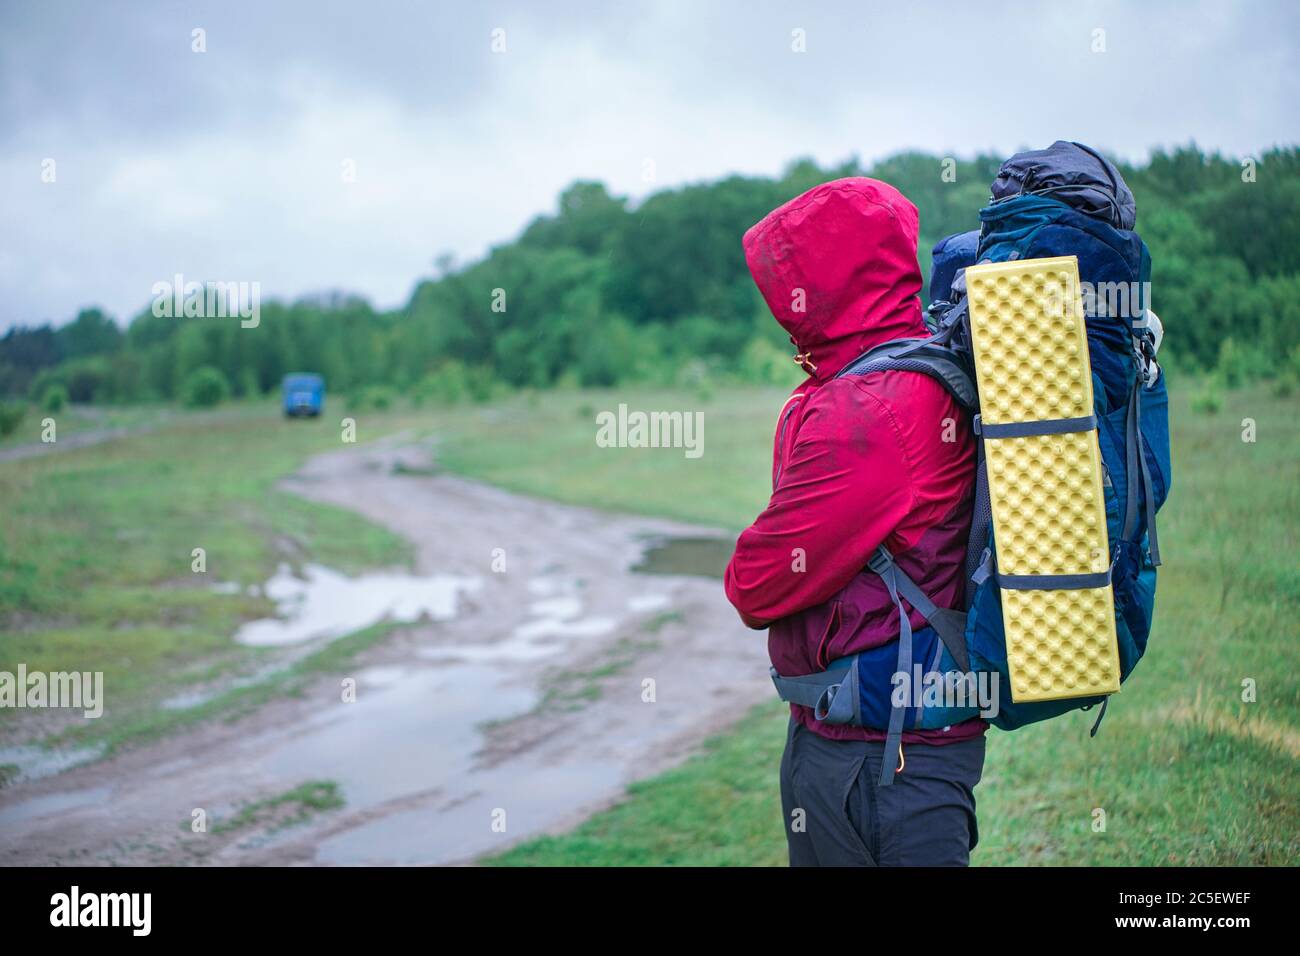 Guy tourist hiker walks along the dirt road with a backpack in a red jacket in the rain Stock Photo